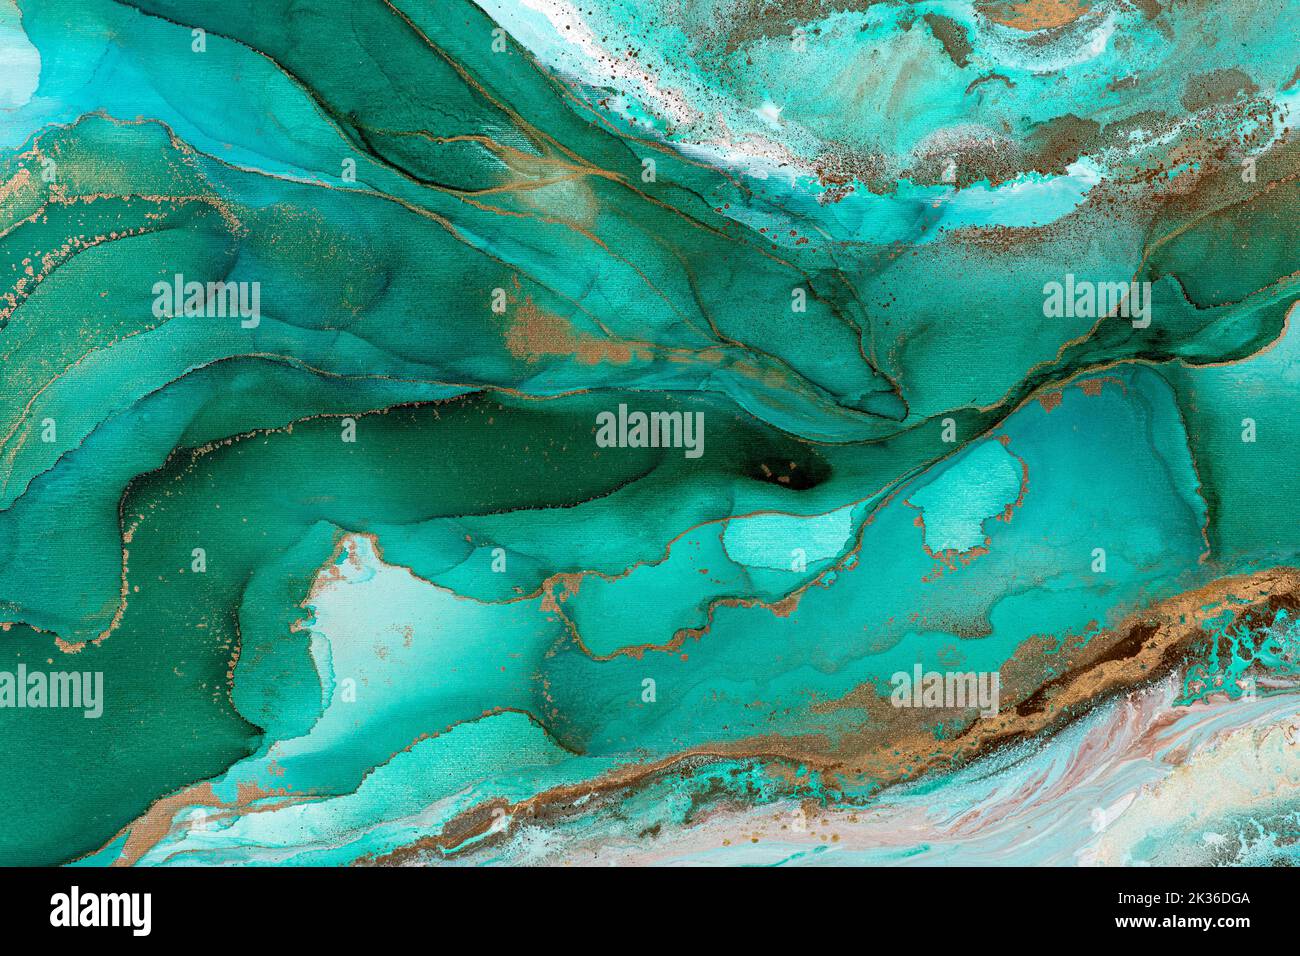 Abstract painting background, new creative artwork in a turquoise color. Stock Photo